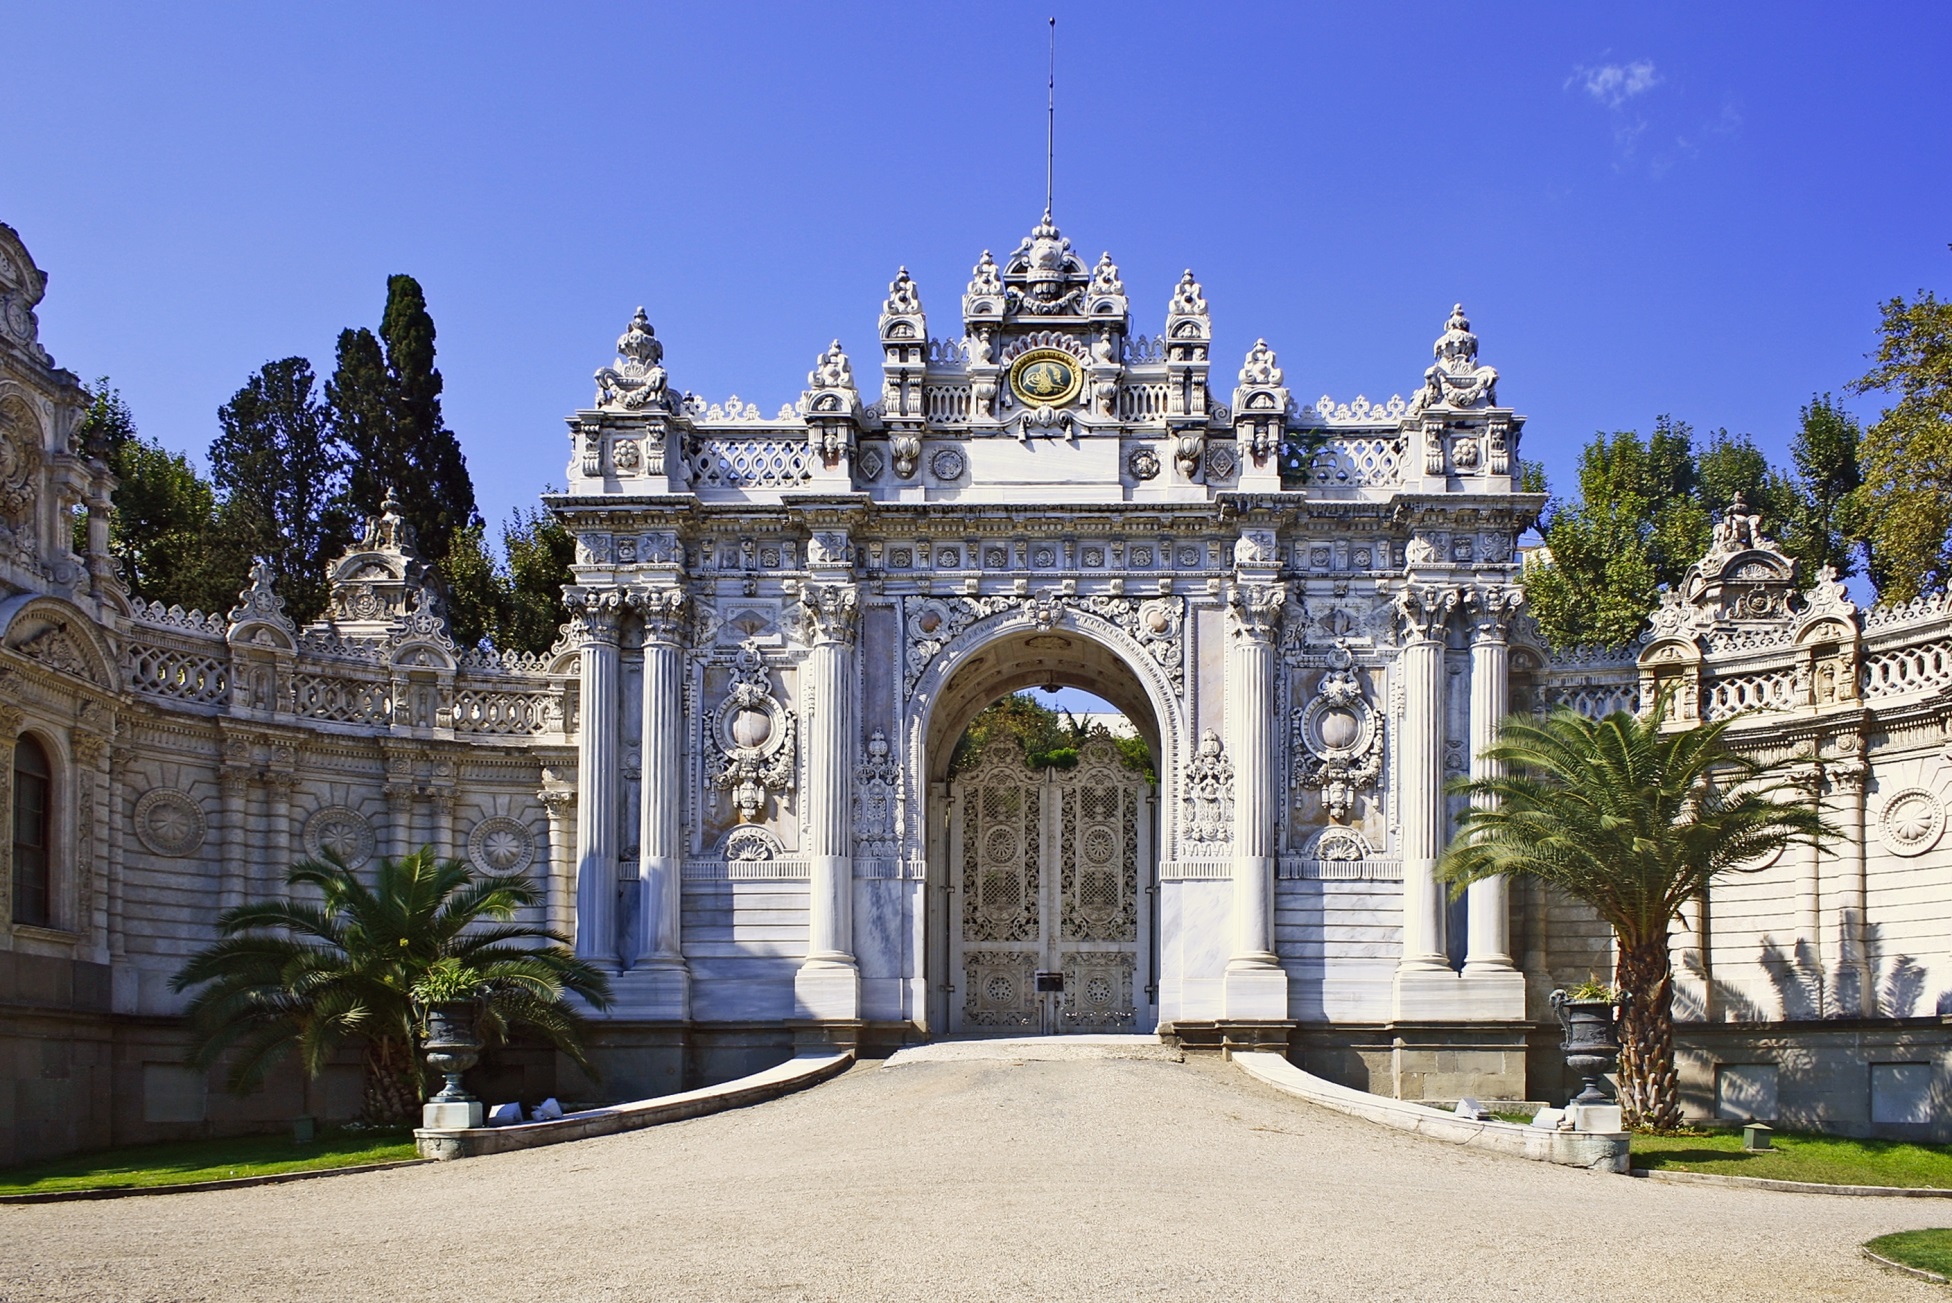 https://www.yizuo-media.com/albums/albums/userpics/10003/Dolmabahce_Palace~2.jpg